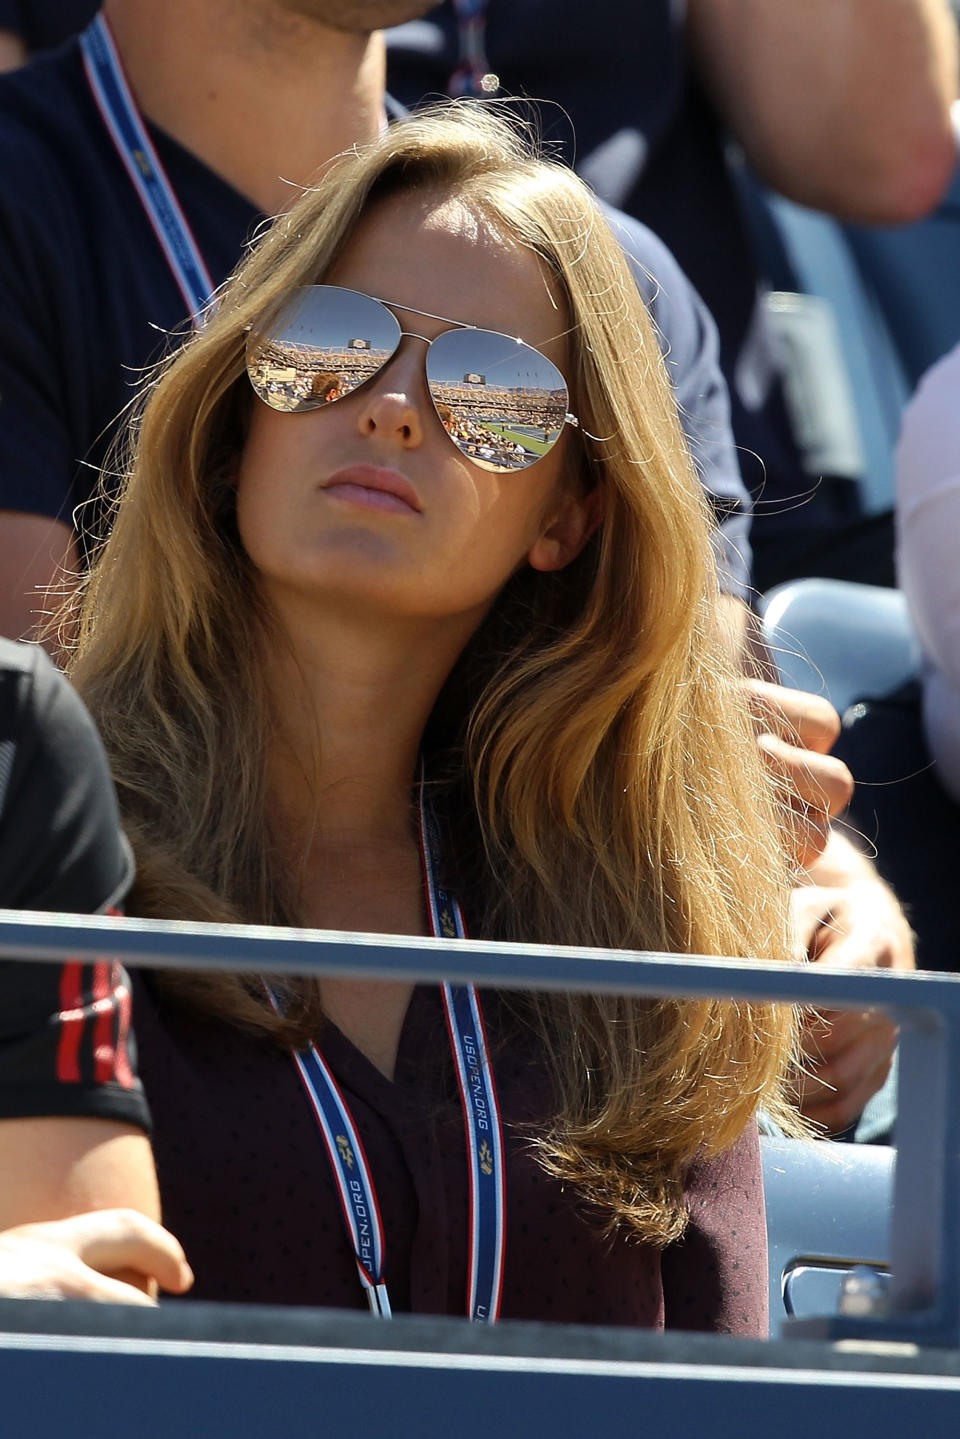 NEW YORK, NY - SEPTEMBER 09: Kim Sears watches as her boyfriend Andy Murray of Great Britain plays against John Isner of the United States during Day Twelve of the 2011 US Open at the USTA Billie Jean King National Tennis Center on September 9, 2011 in the Flushing neighborhood of the Queens borough of New York City. (Photo by Matthew Stockman/Getty Images)